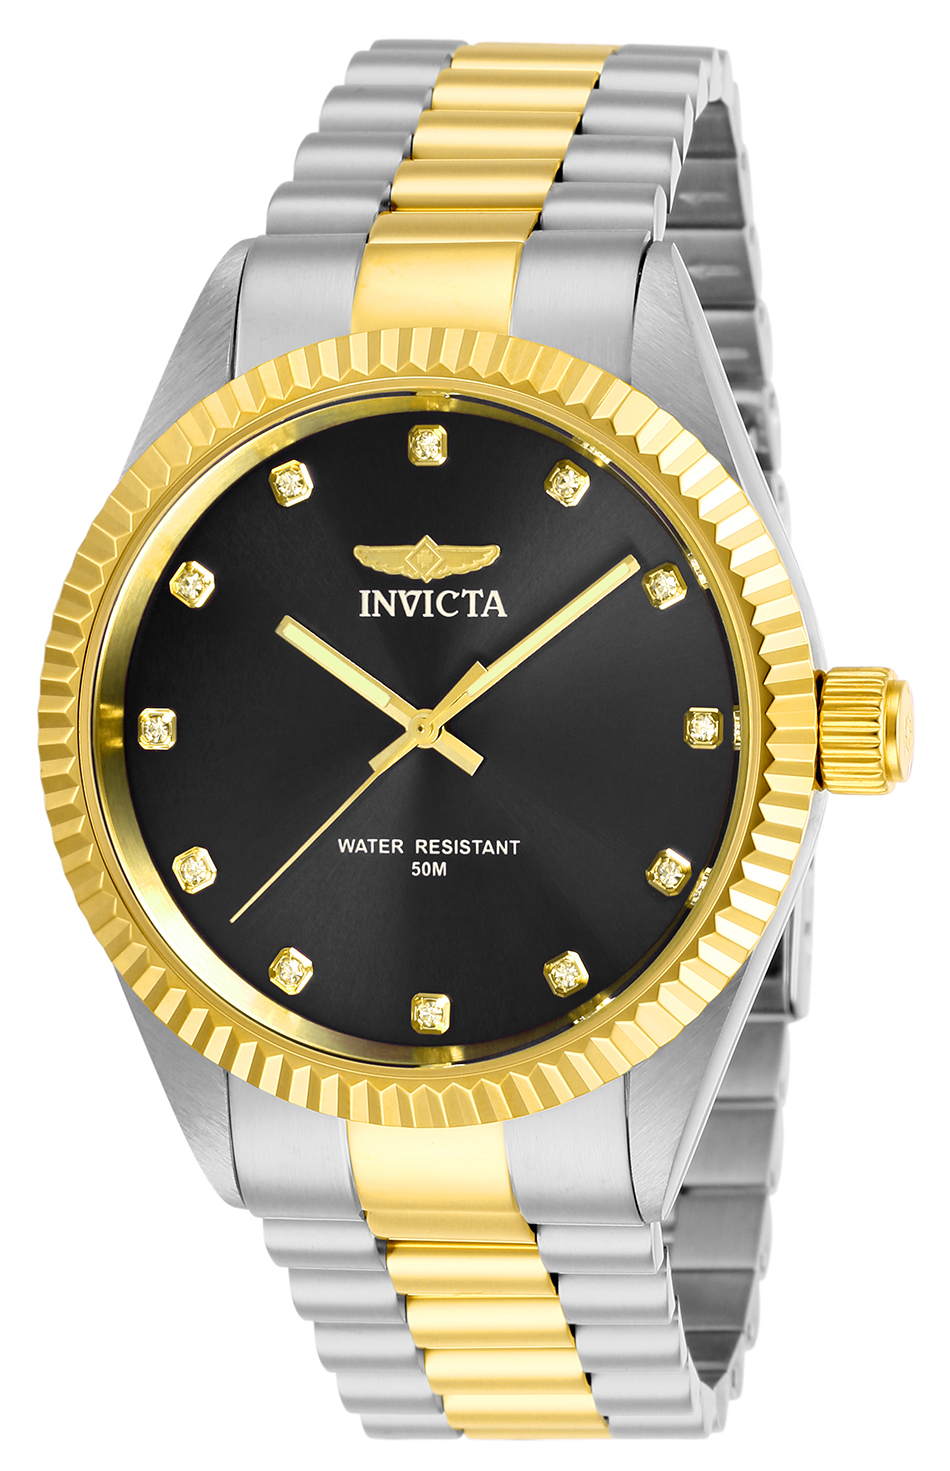 Pre-Owned Invicta Specialty Quartz Men's Watch - 43mm Stainless Steel Case, Stainless Steel Band, Steel, Gold (AIC-29503)